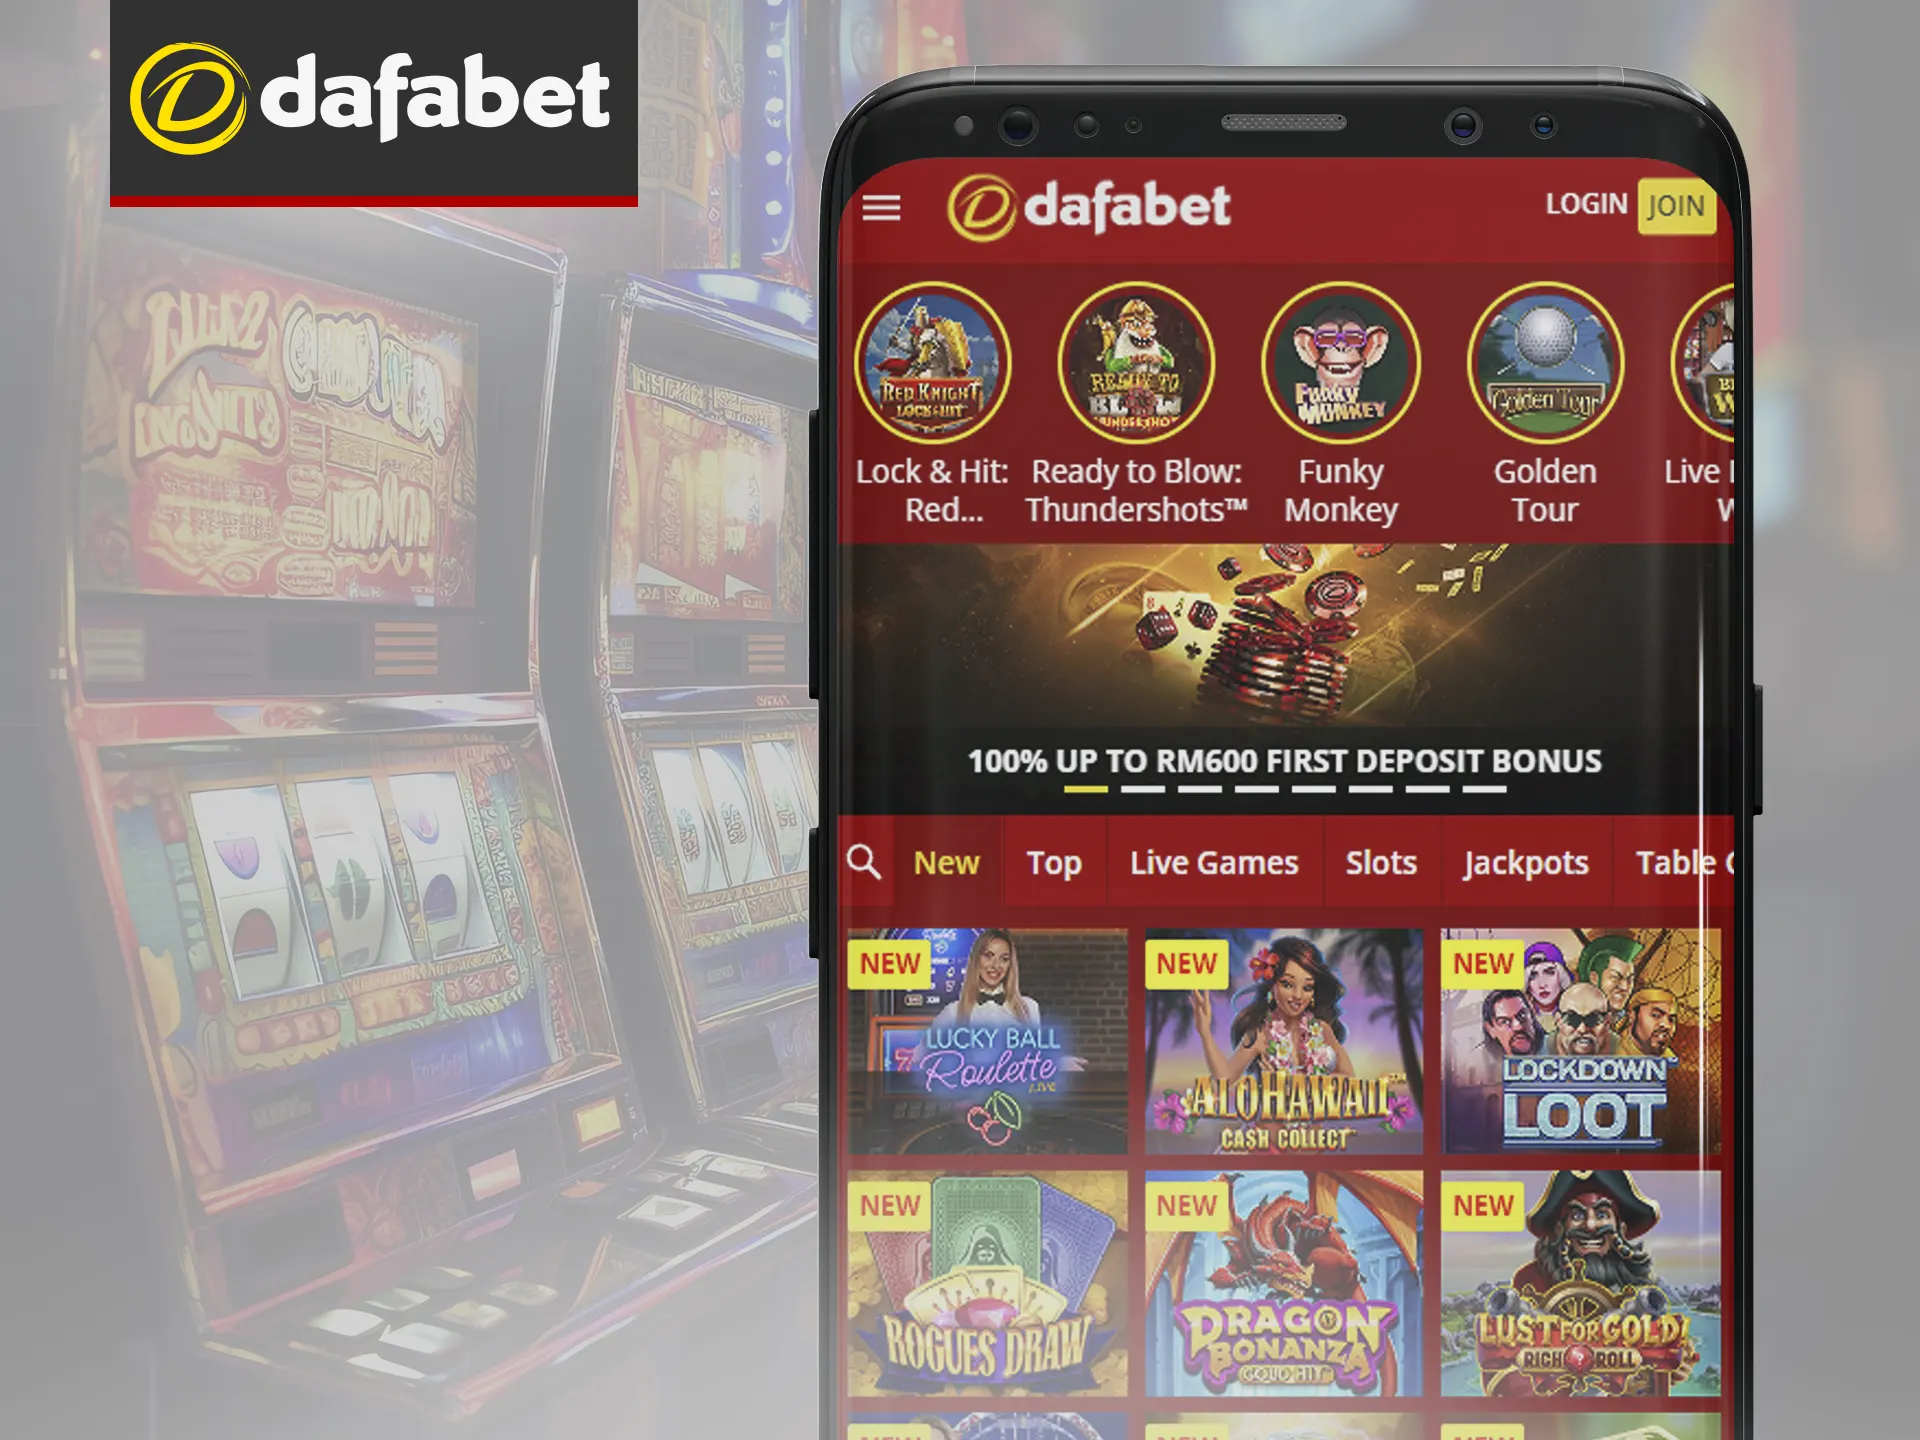 Fast-loading, no-installation mobile version of Dafabet for convenient and secure betting on most smartphones.